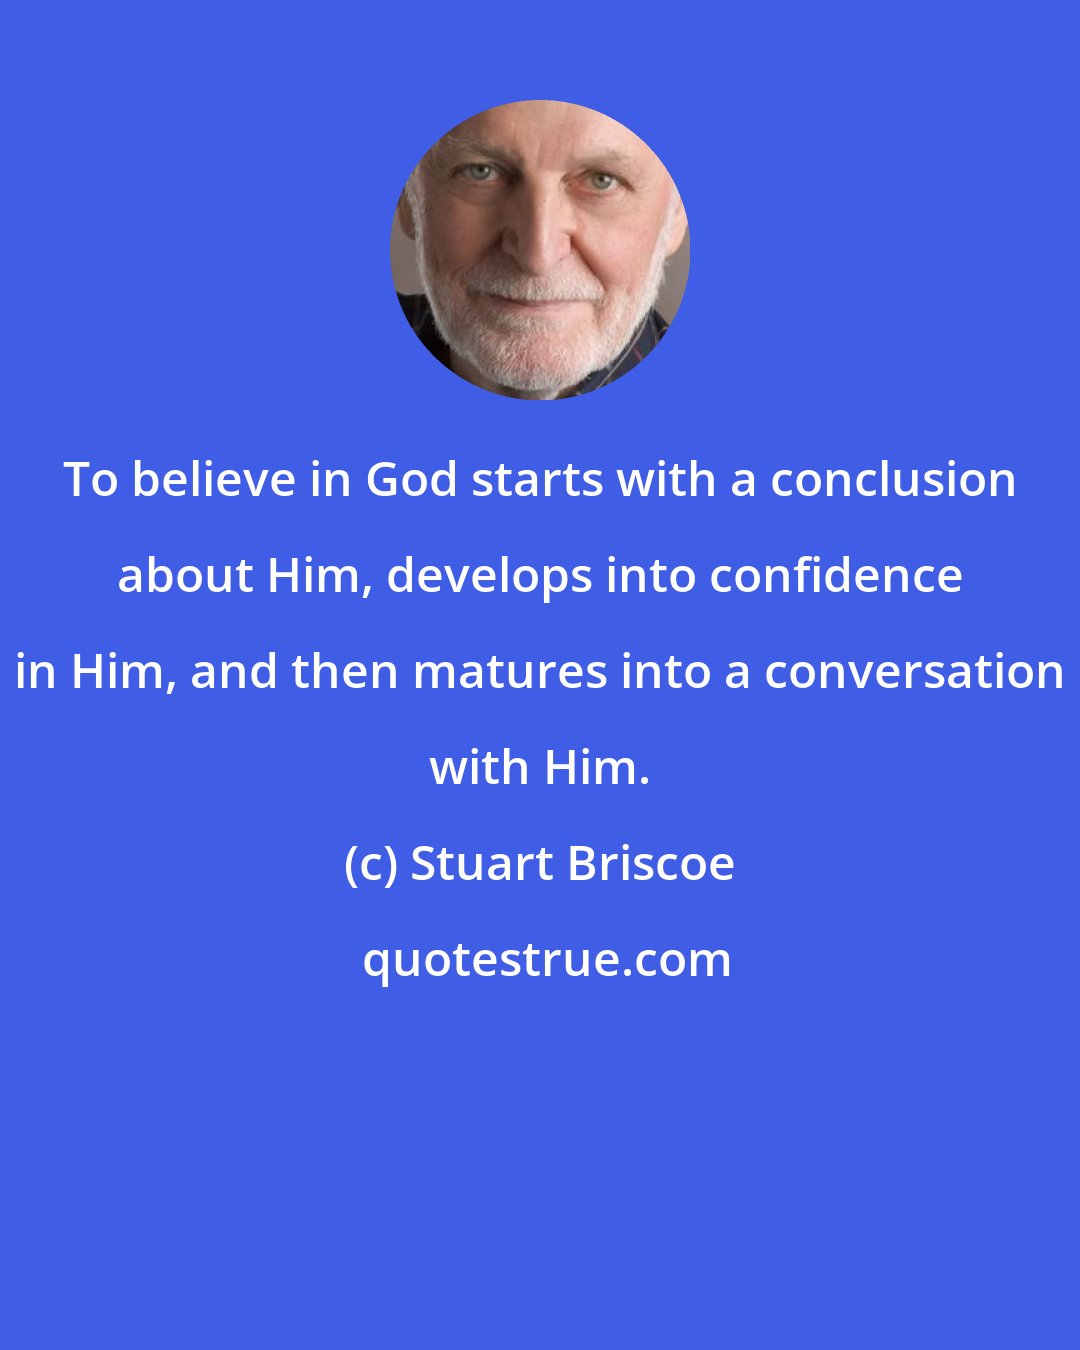 Stuart Briscoe: To believe in God starts with a conclusion about Him, develops into confidence in Him, and then matures into a conversation with Him.